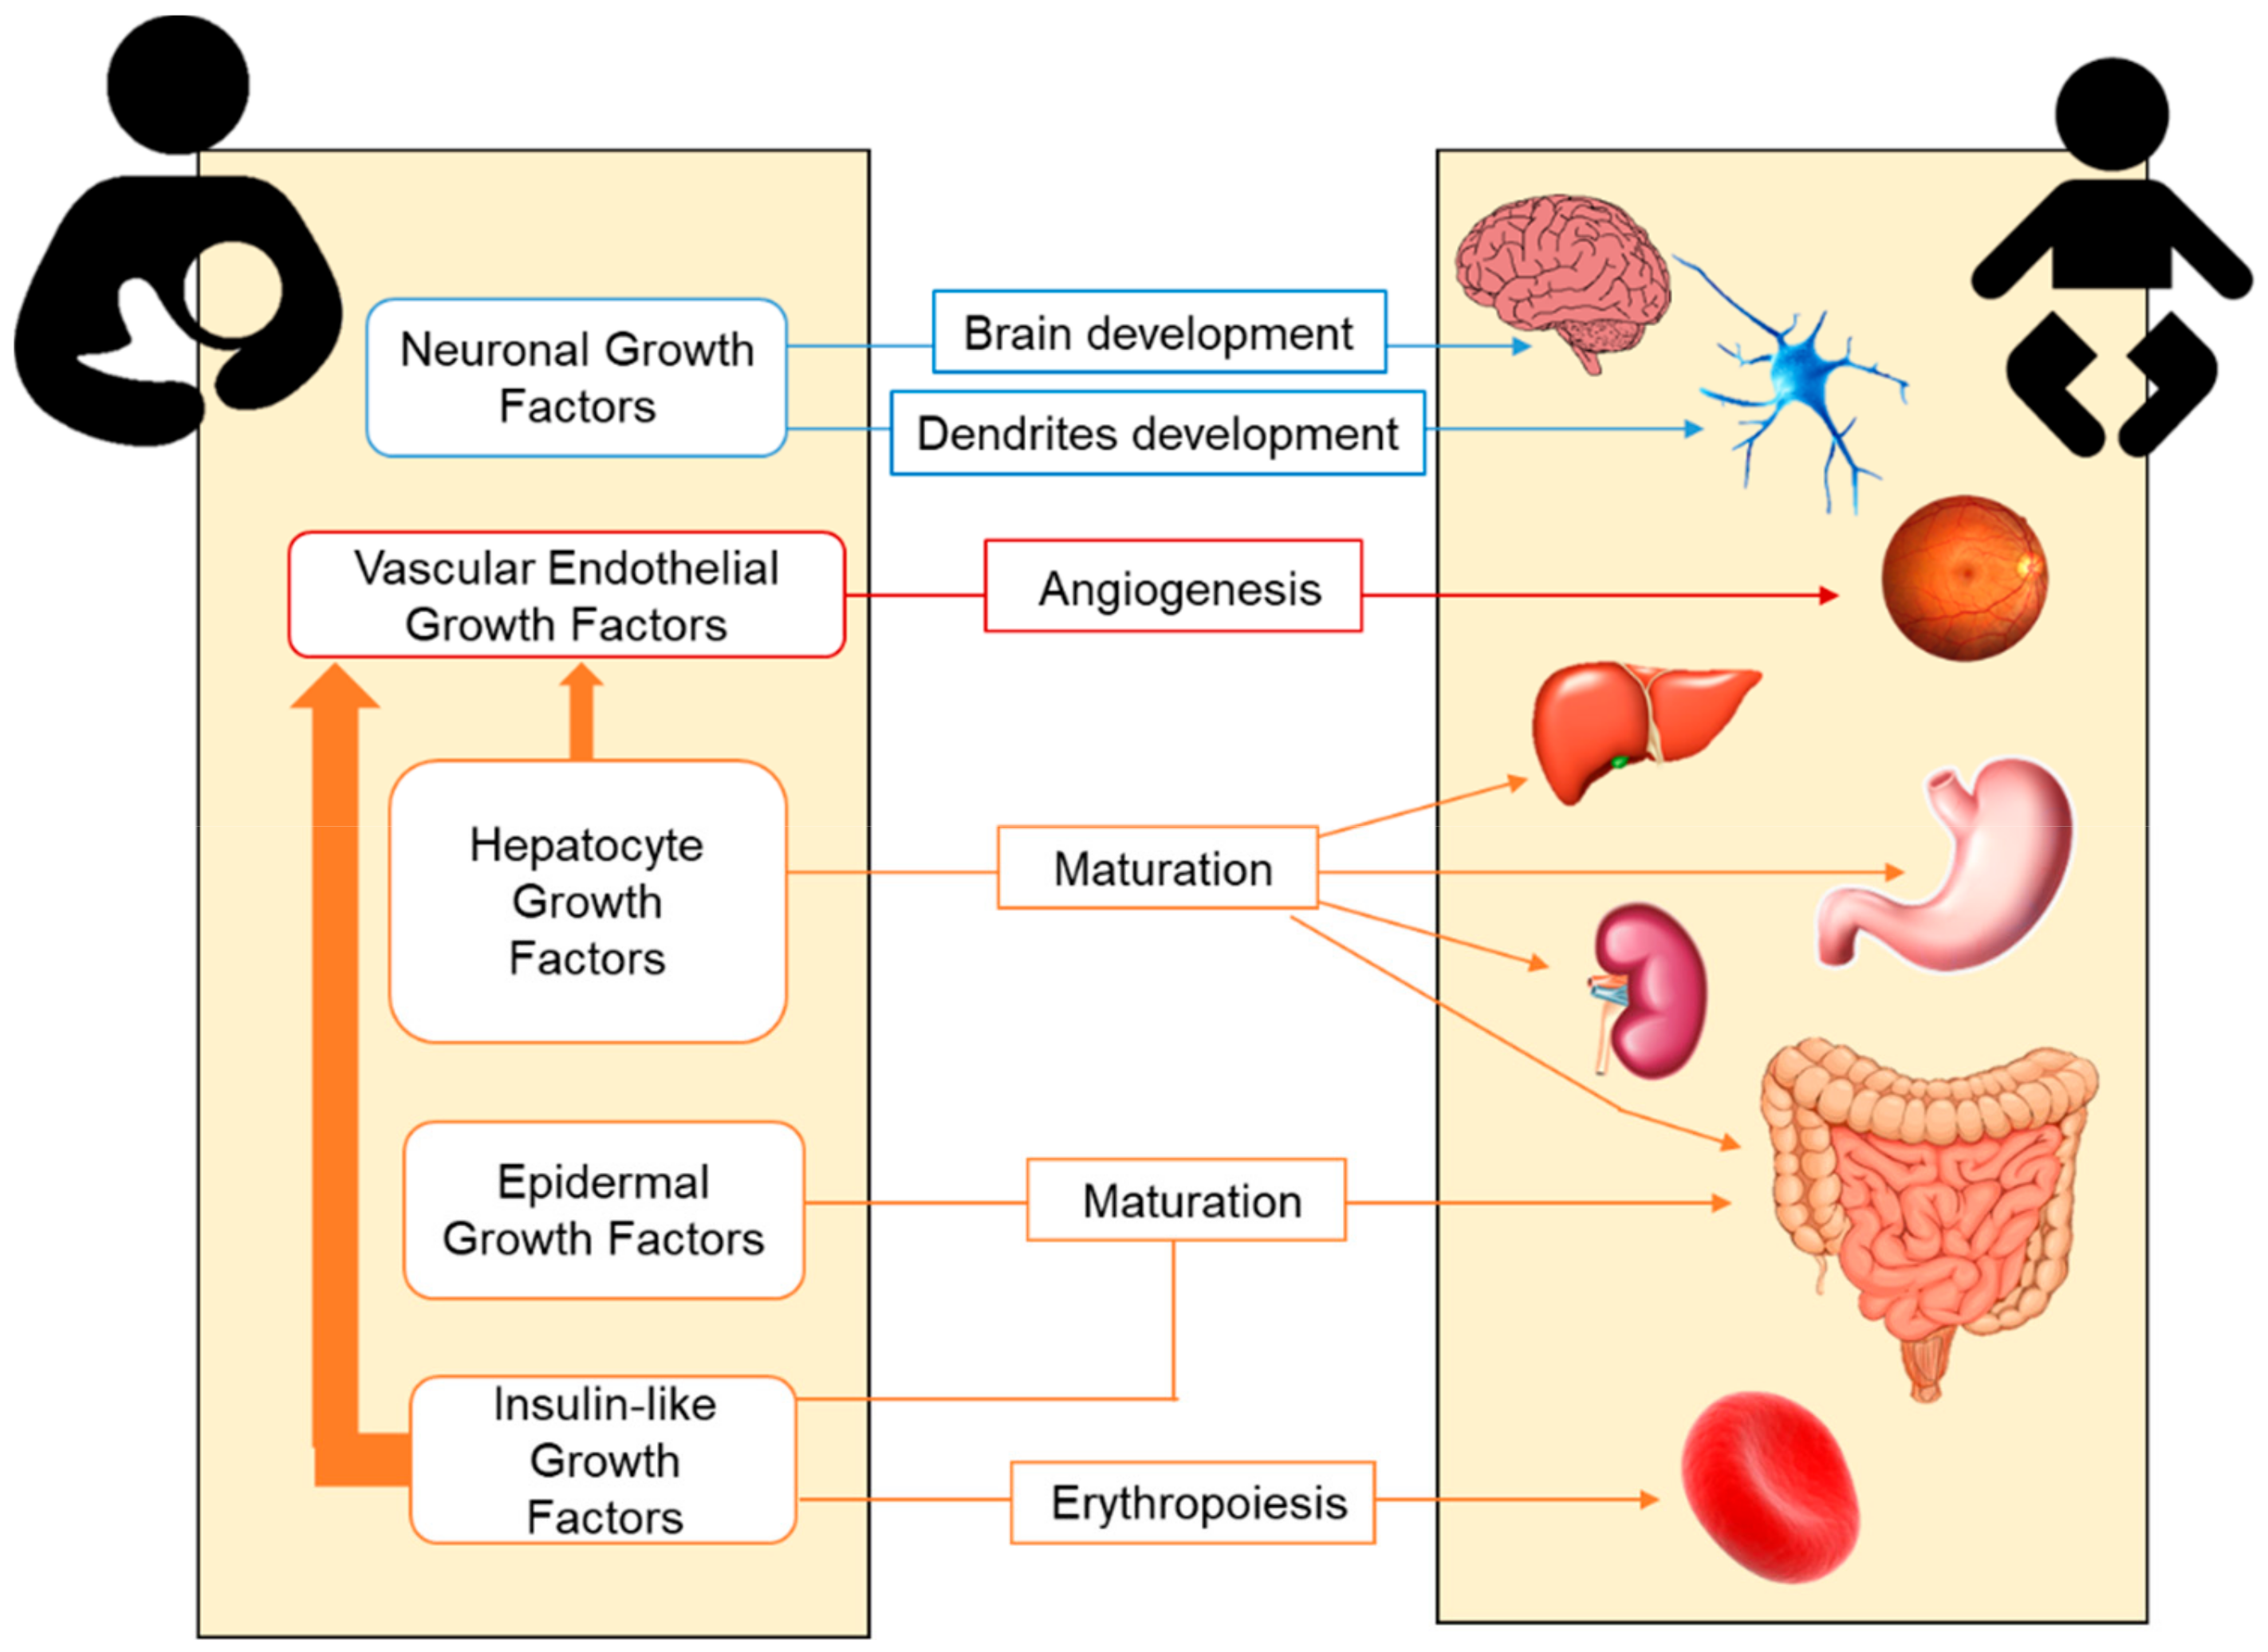 A Review of Bioactive Factors in Human Breastmilk: A Focus on Prematurity